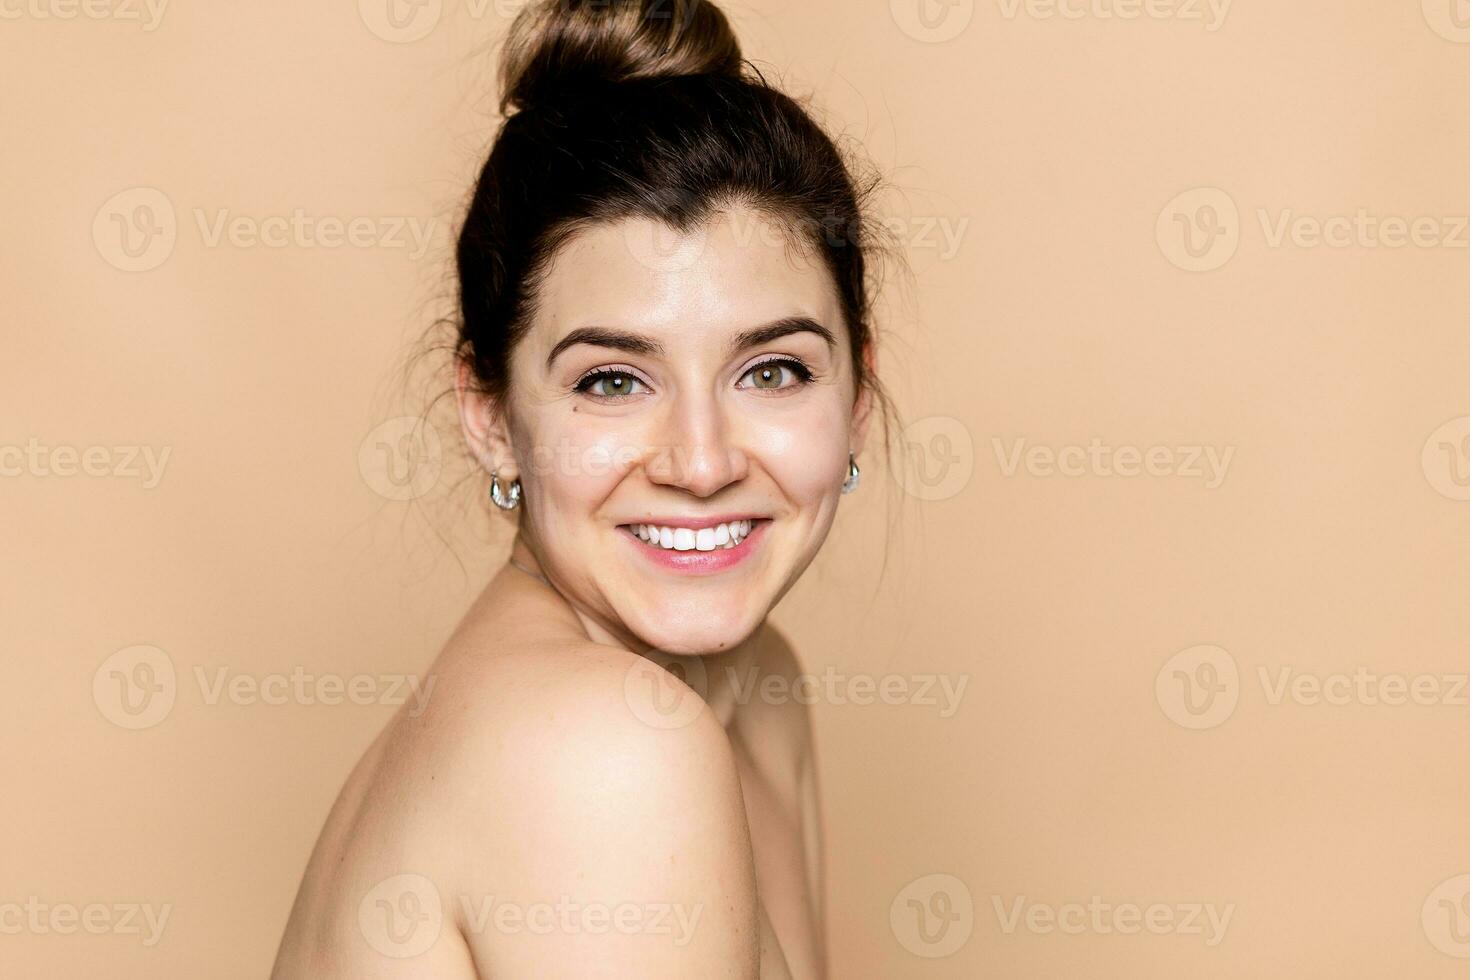 young woman face and hands over beige background photo